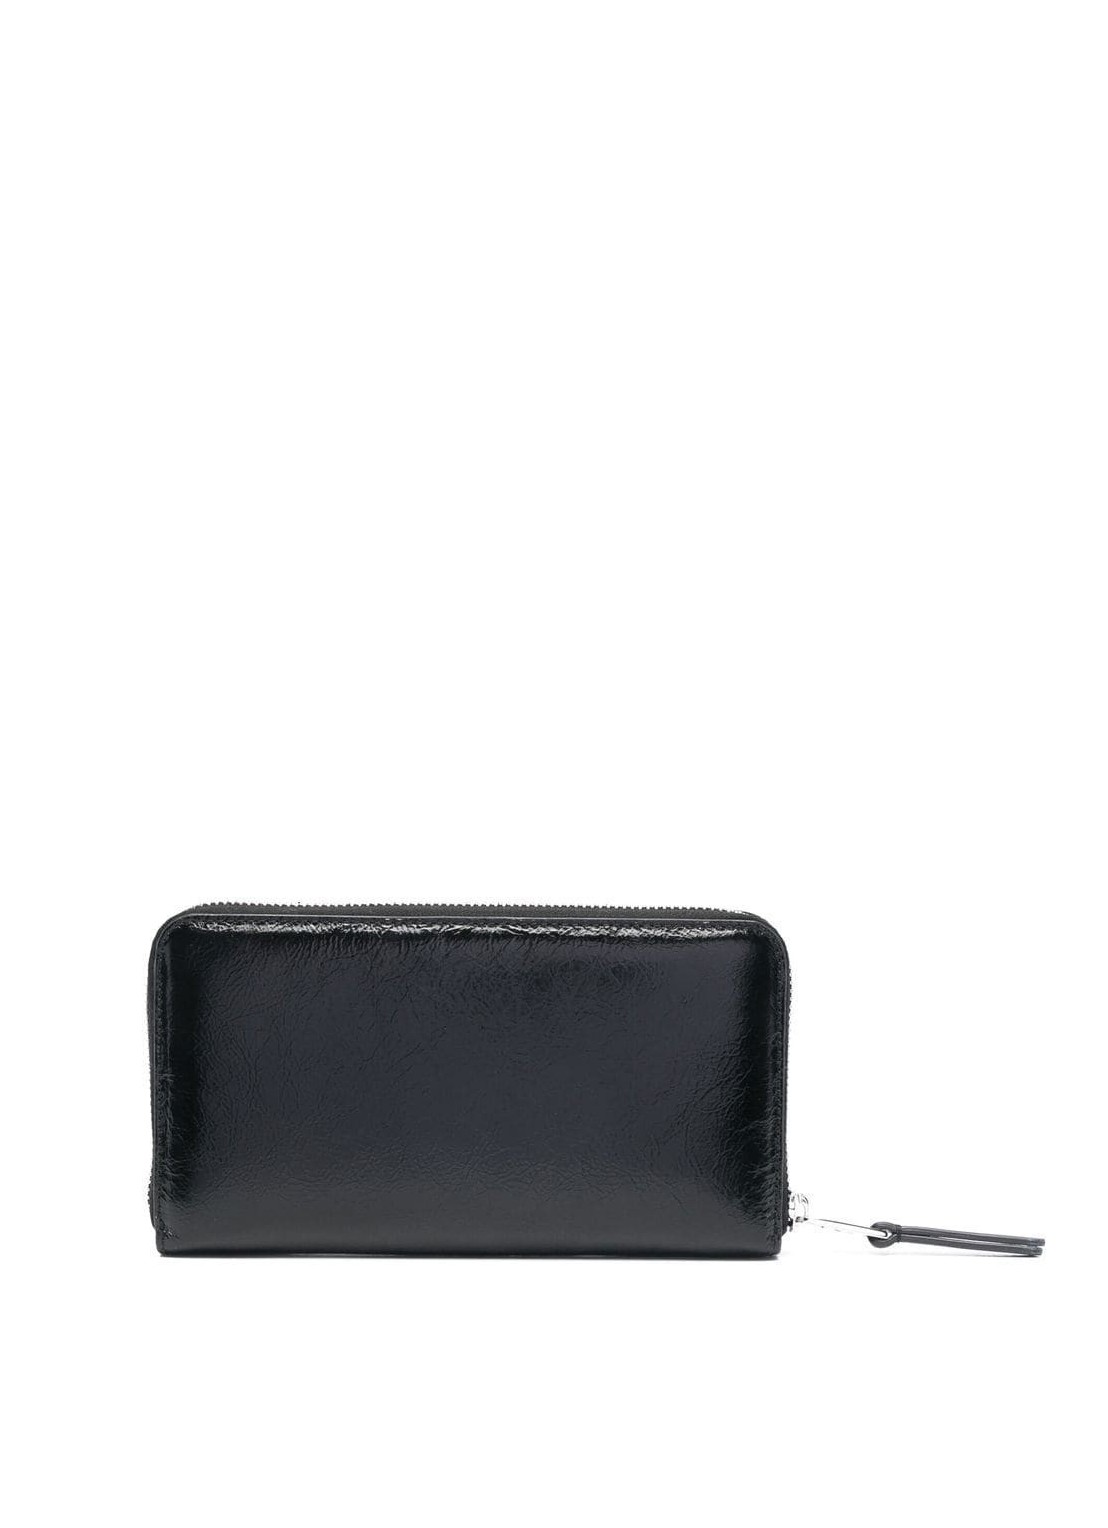 karl lagerfeld wallet woman k/signature soft cont wallet 230w3228 a999 ...